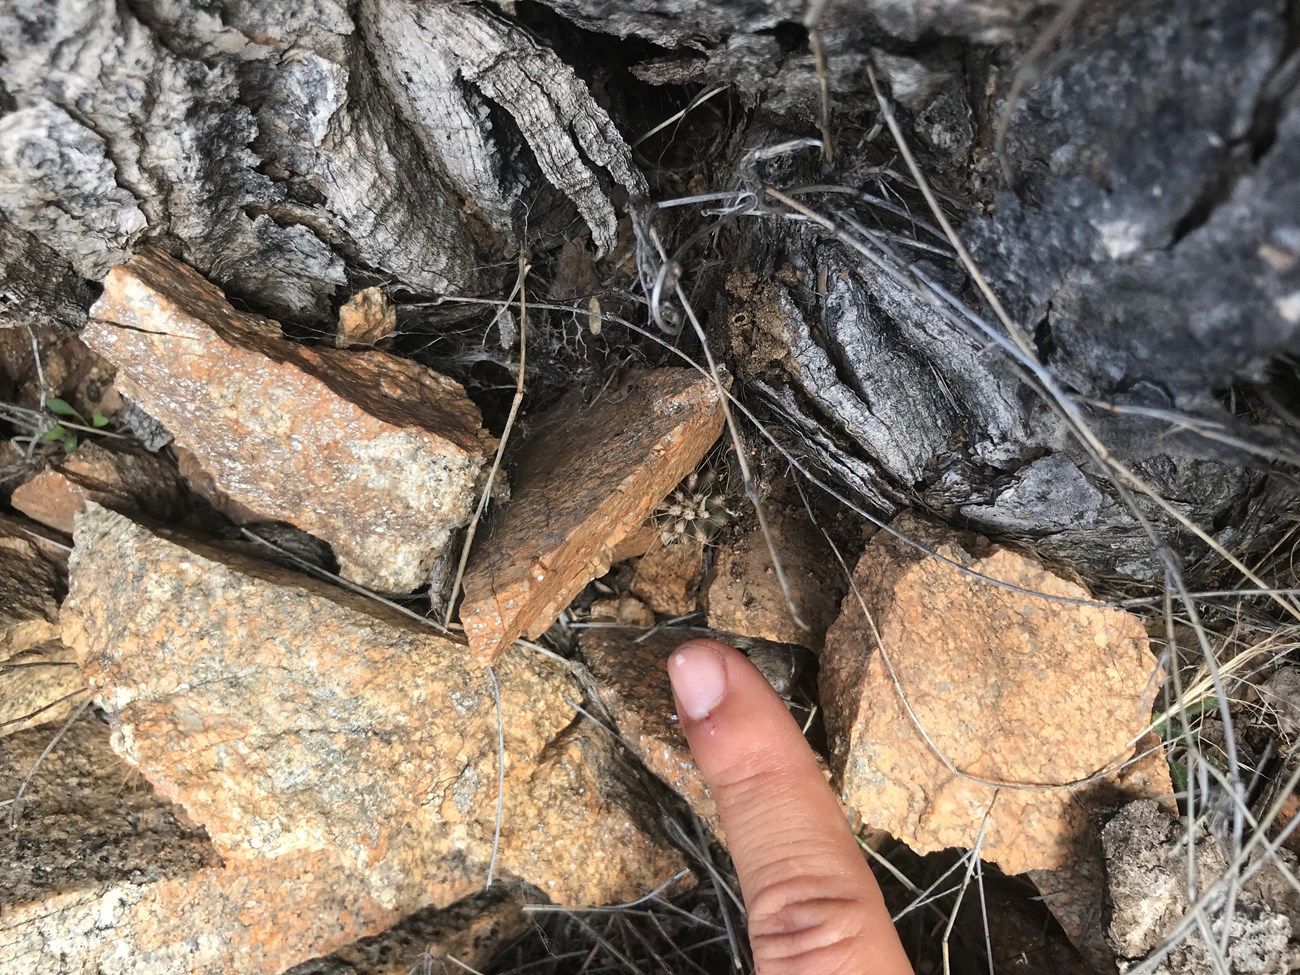 A finger pointing toward a tiny saguaro growing out of rocks.